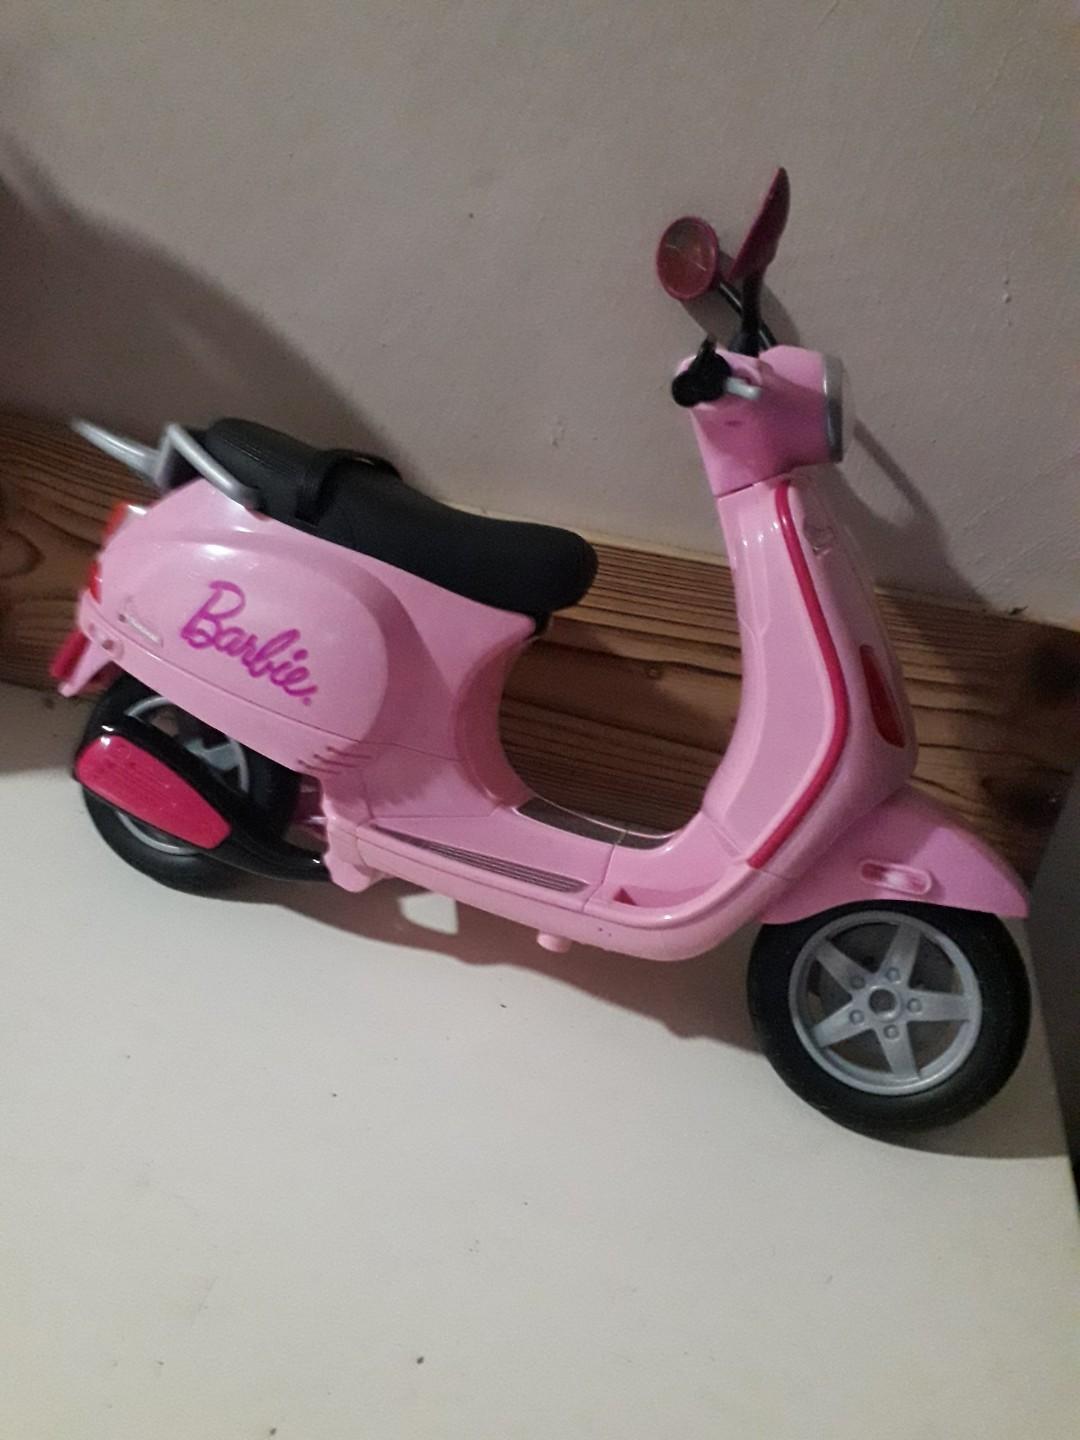 barbie scooter toy